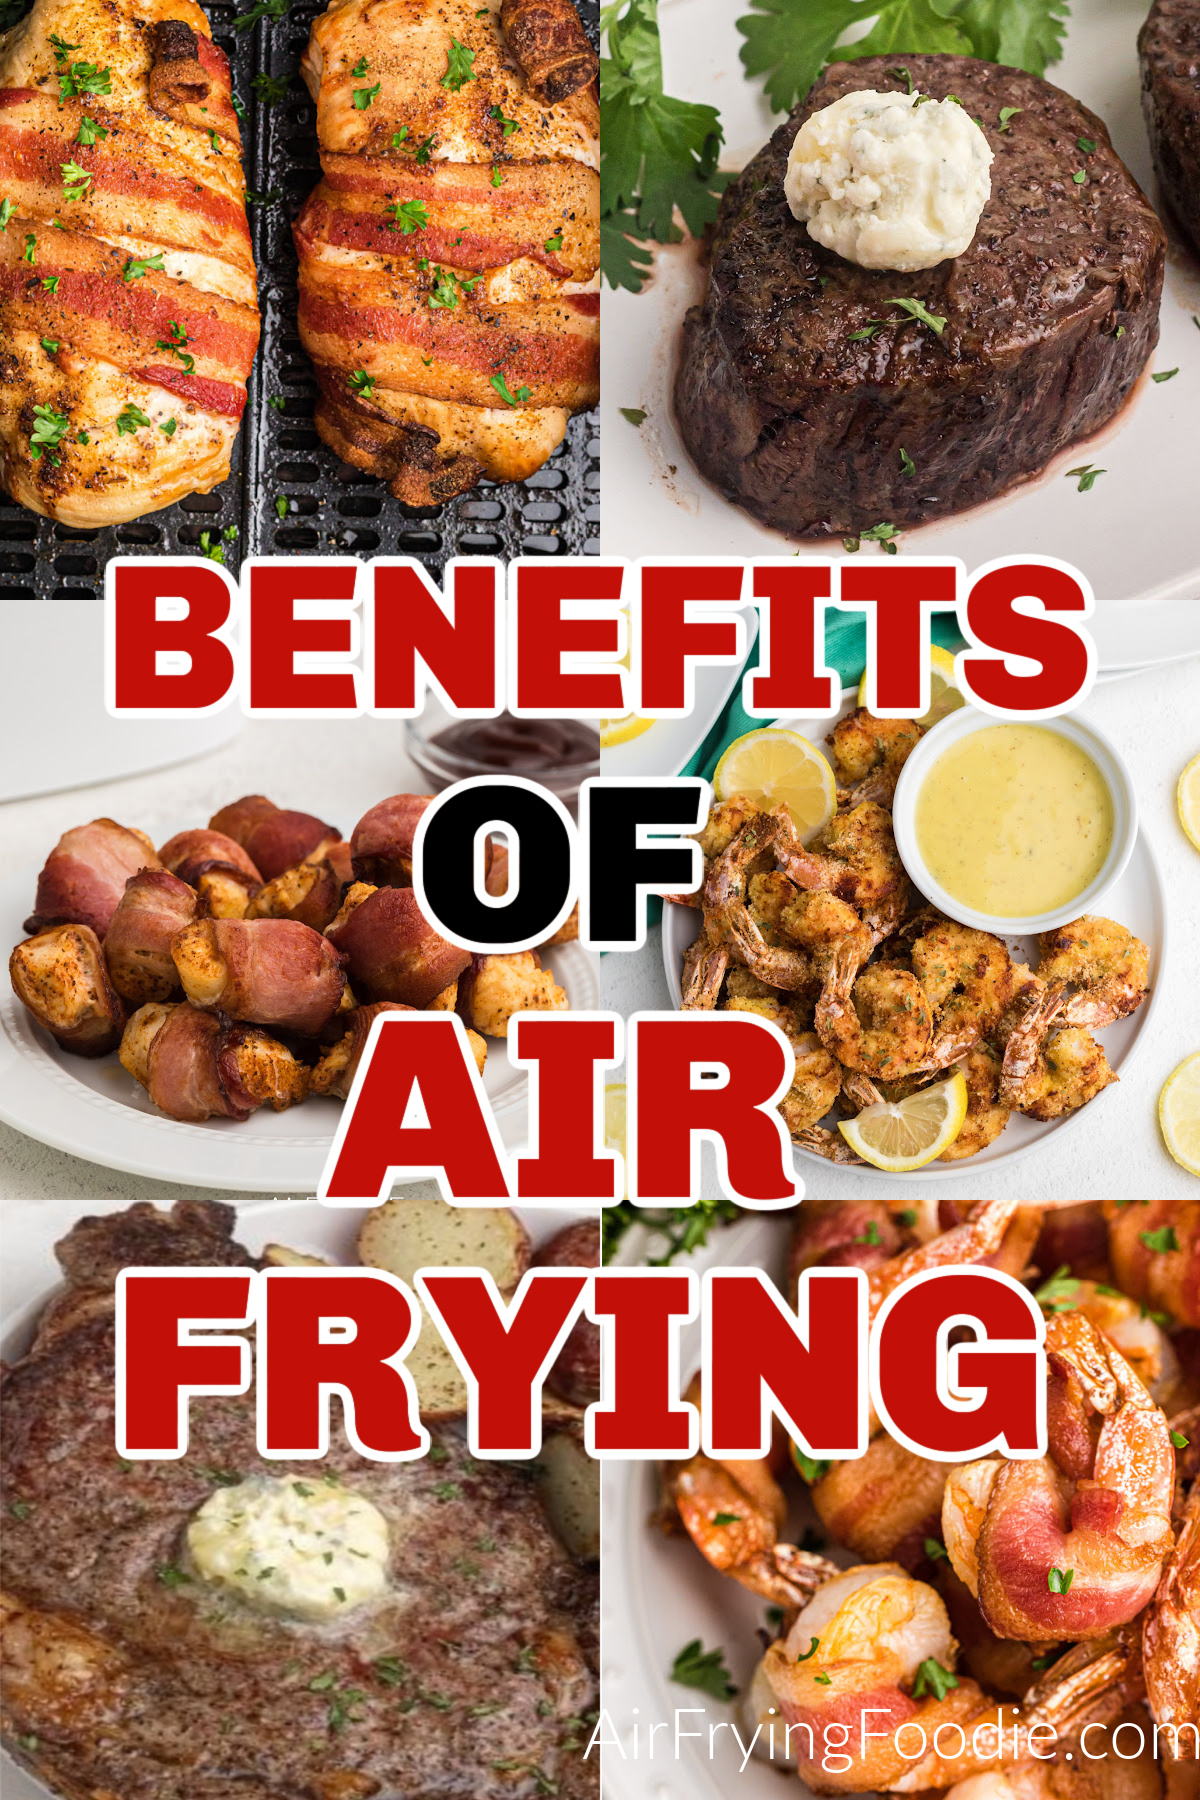 Collage of food photos with the text "benefits of air frying" overlaying the photos. 